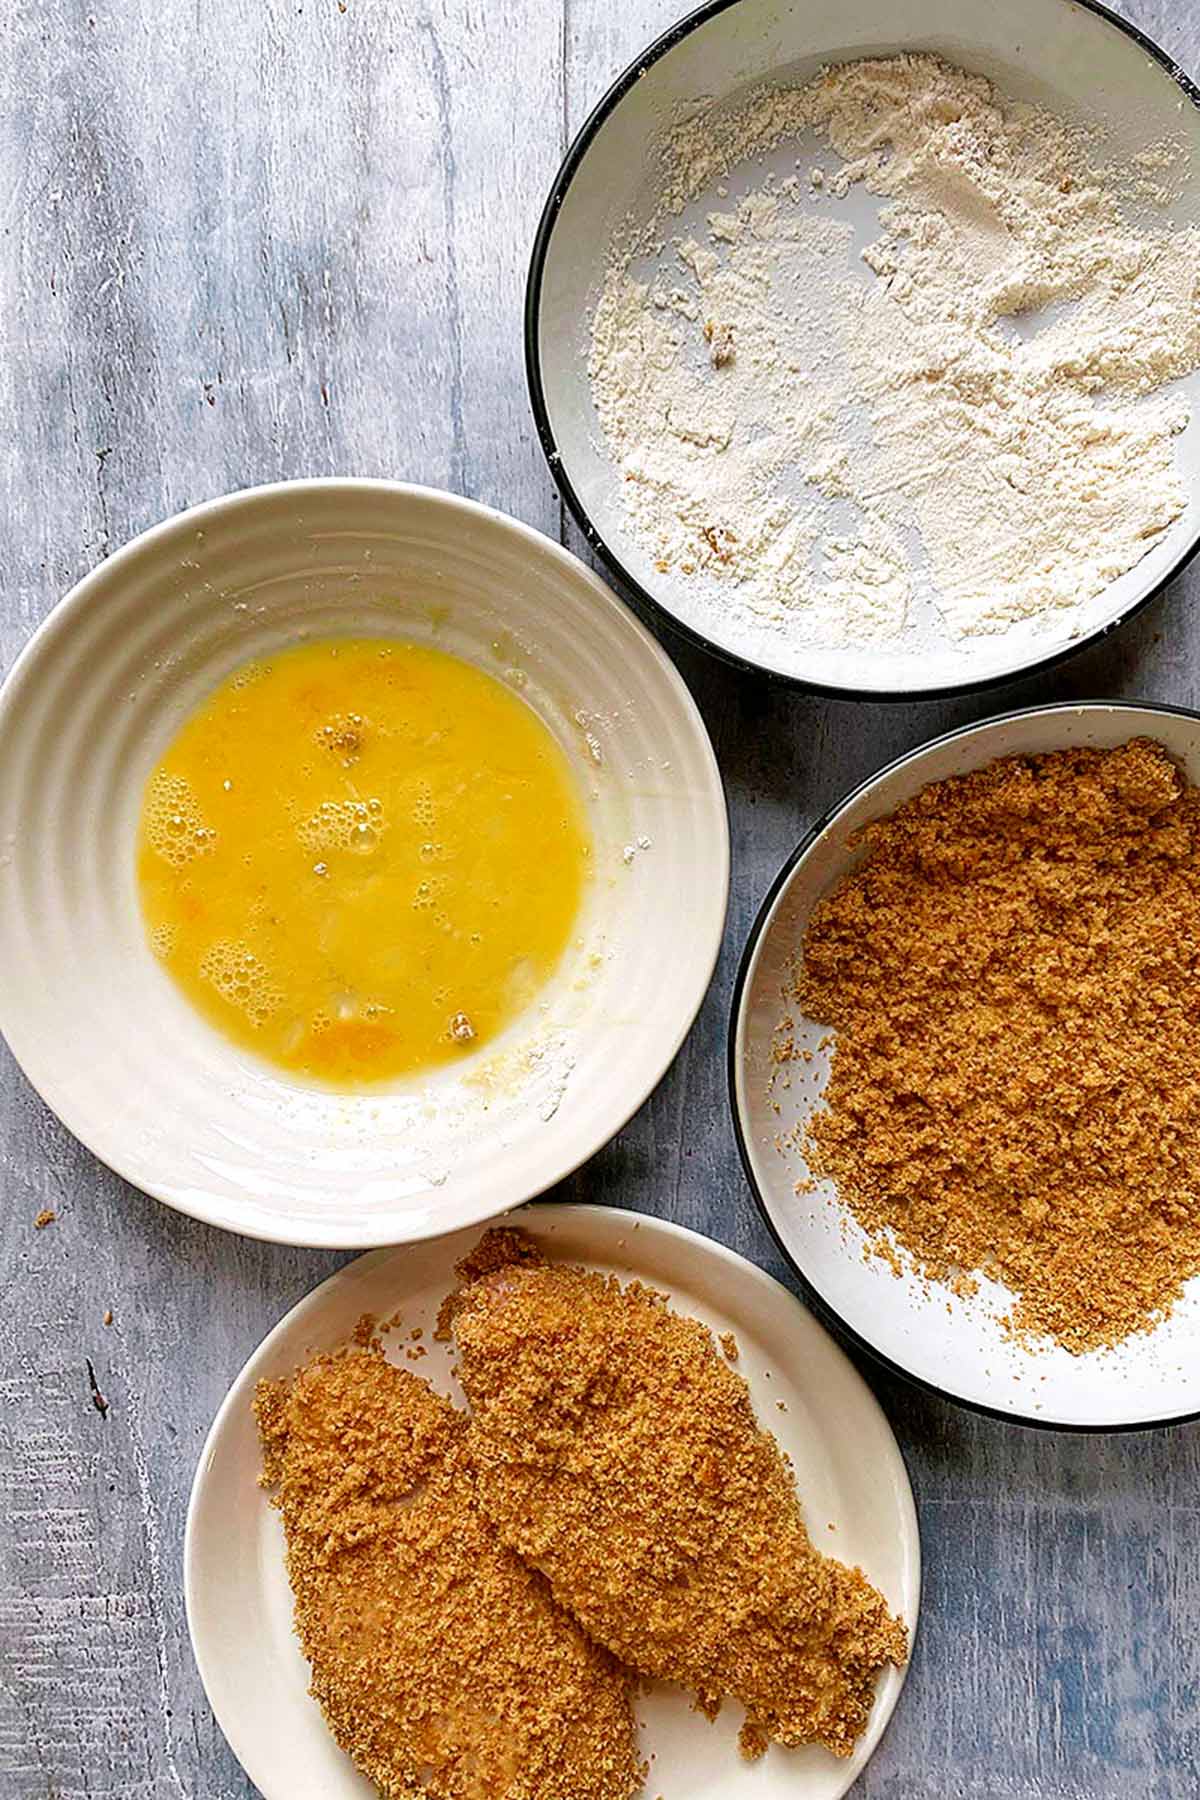 Bowls of flour, whisked egg and breadcrumbs next to coated chicken breasts.